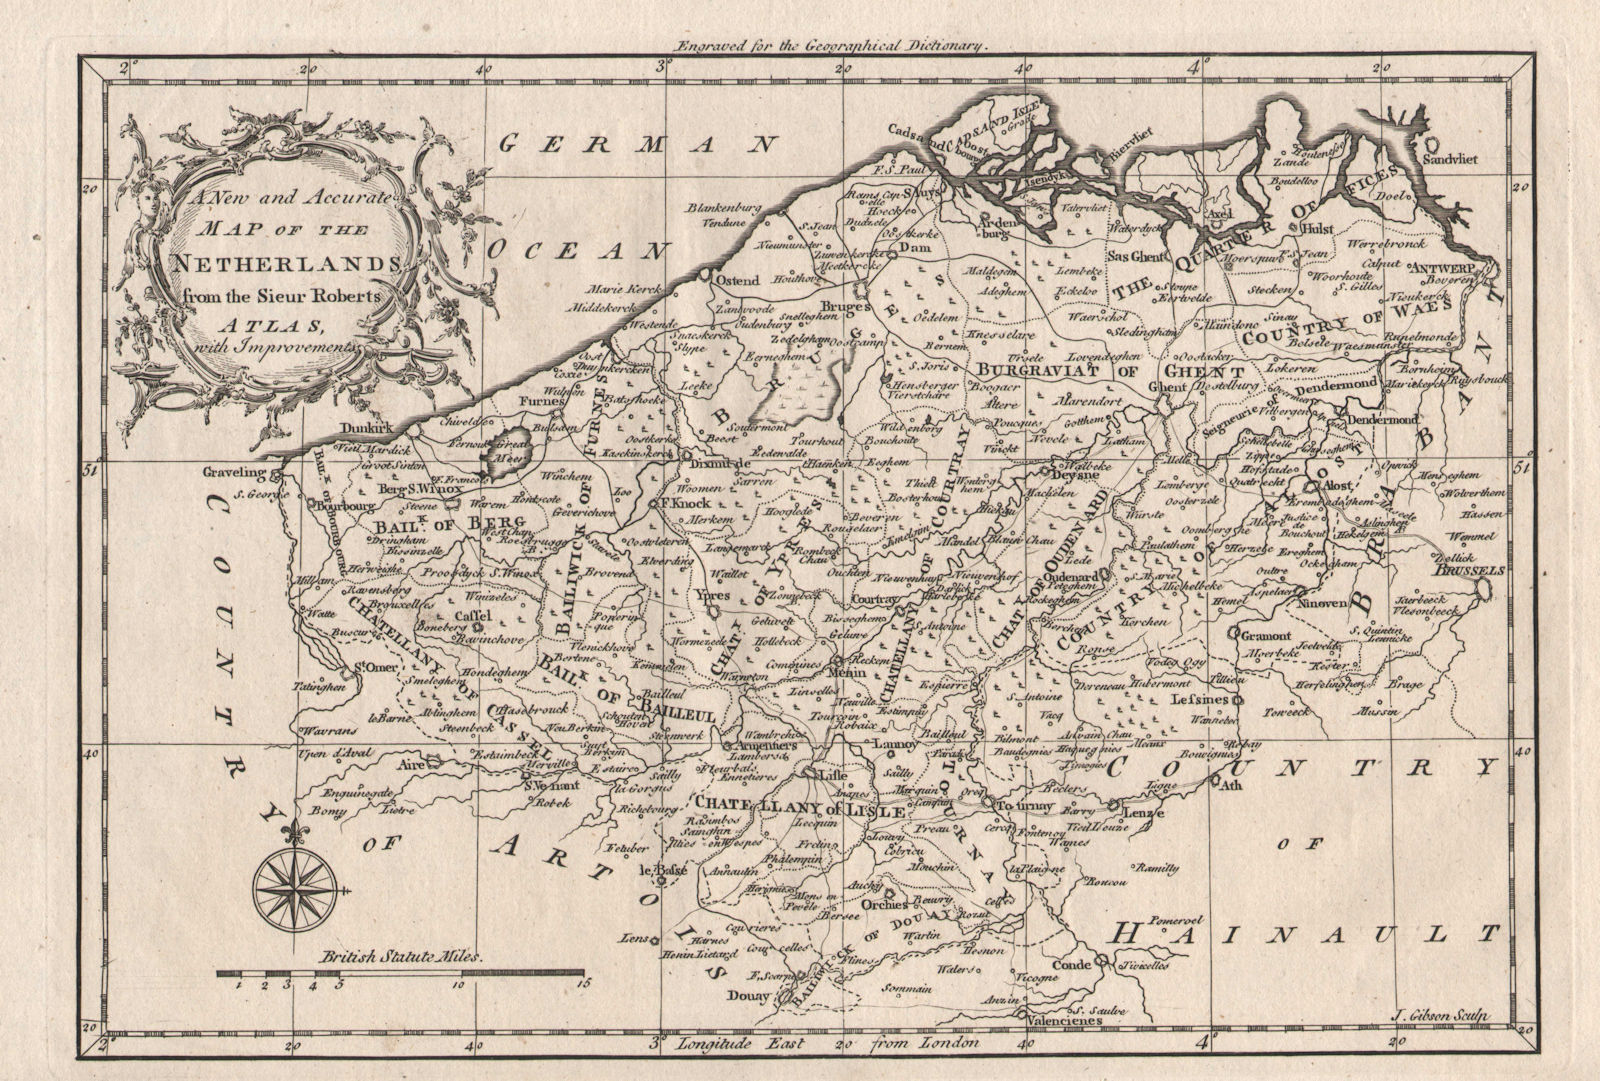 Associate Product "A new and accurate map of the Netherlands". North-west Belgium. GIBSON c1759